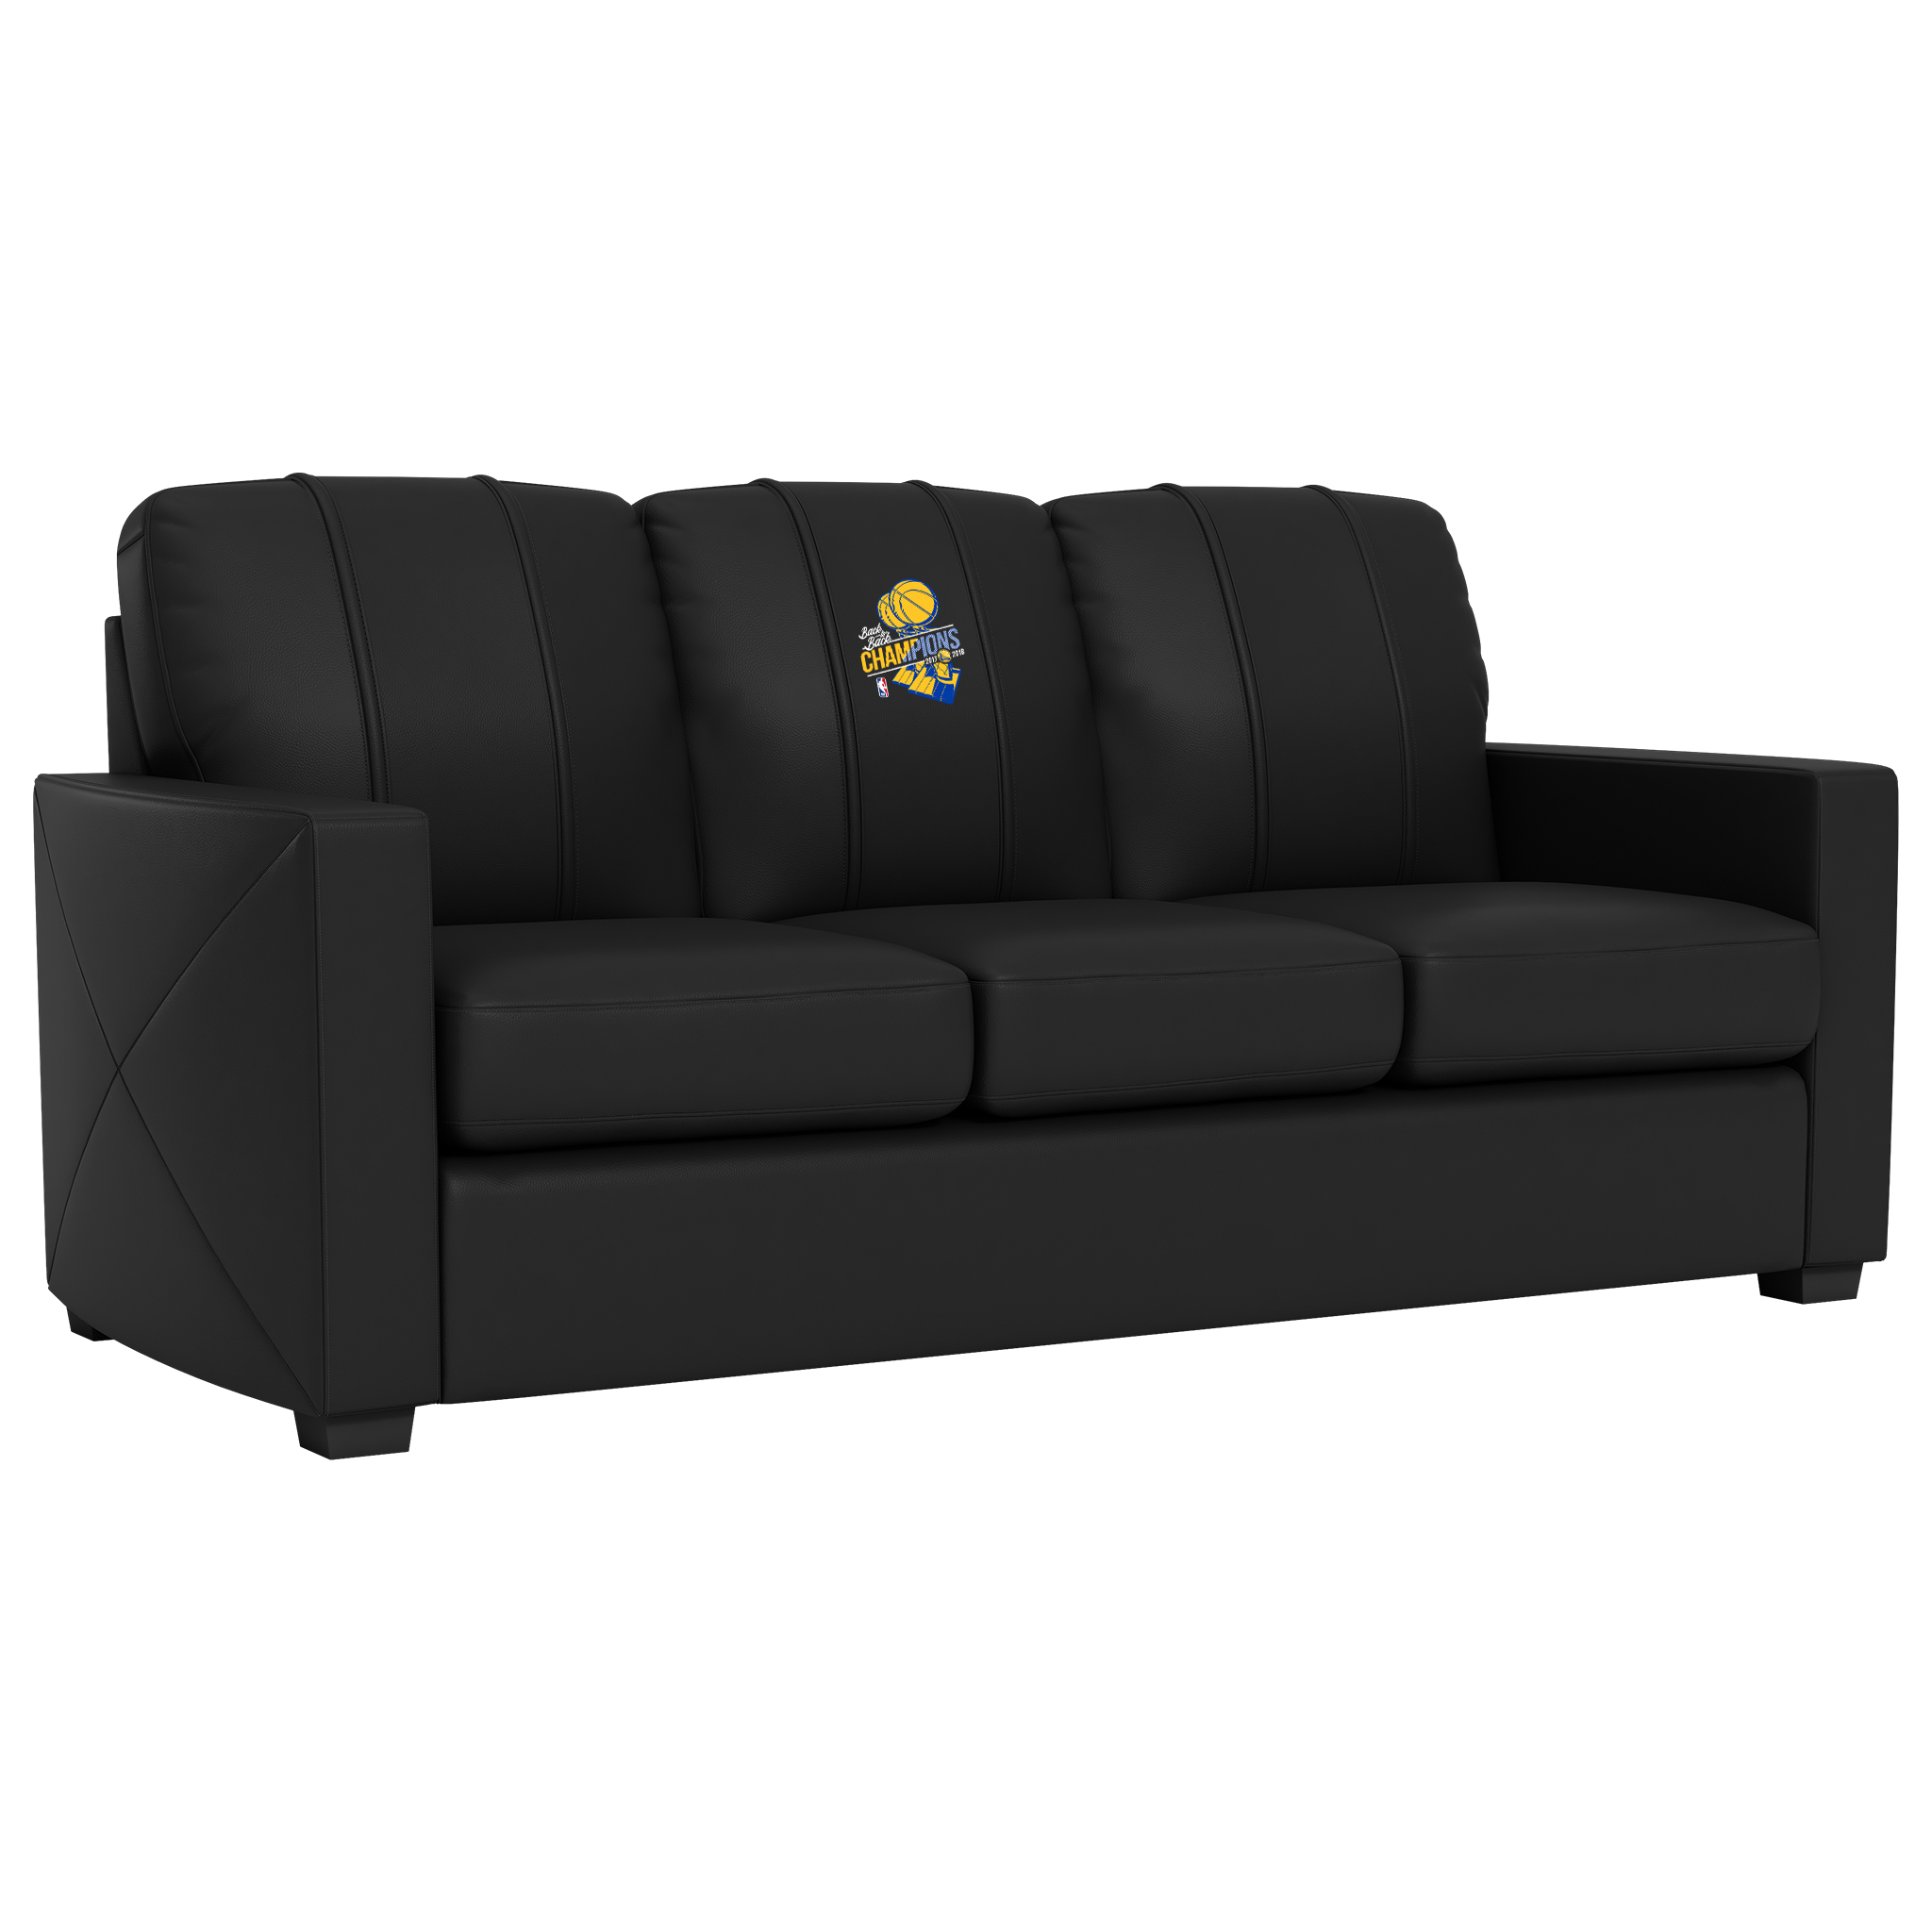 Golden State Warriors Silver Sofa with Golden State Warriors 2018 Champions Logo Panel